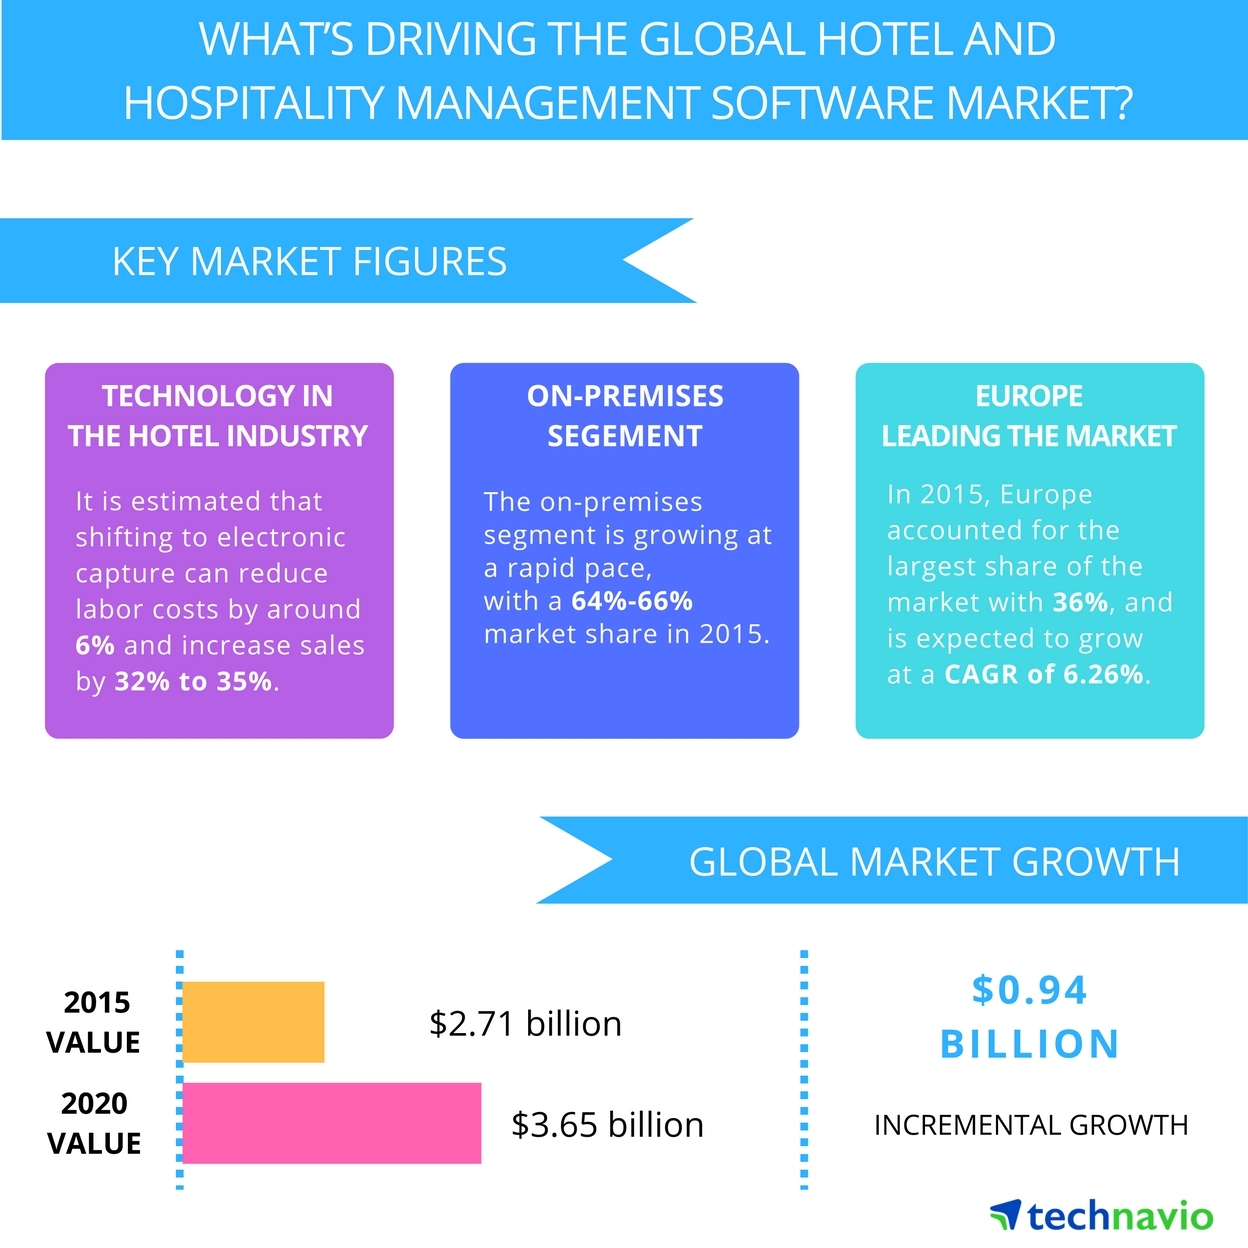 Growth in Hospitality Industry Expected to Drive Global Commercial